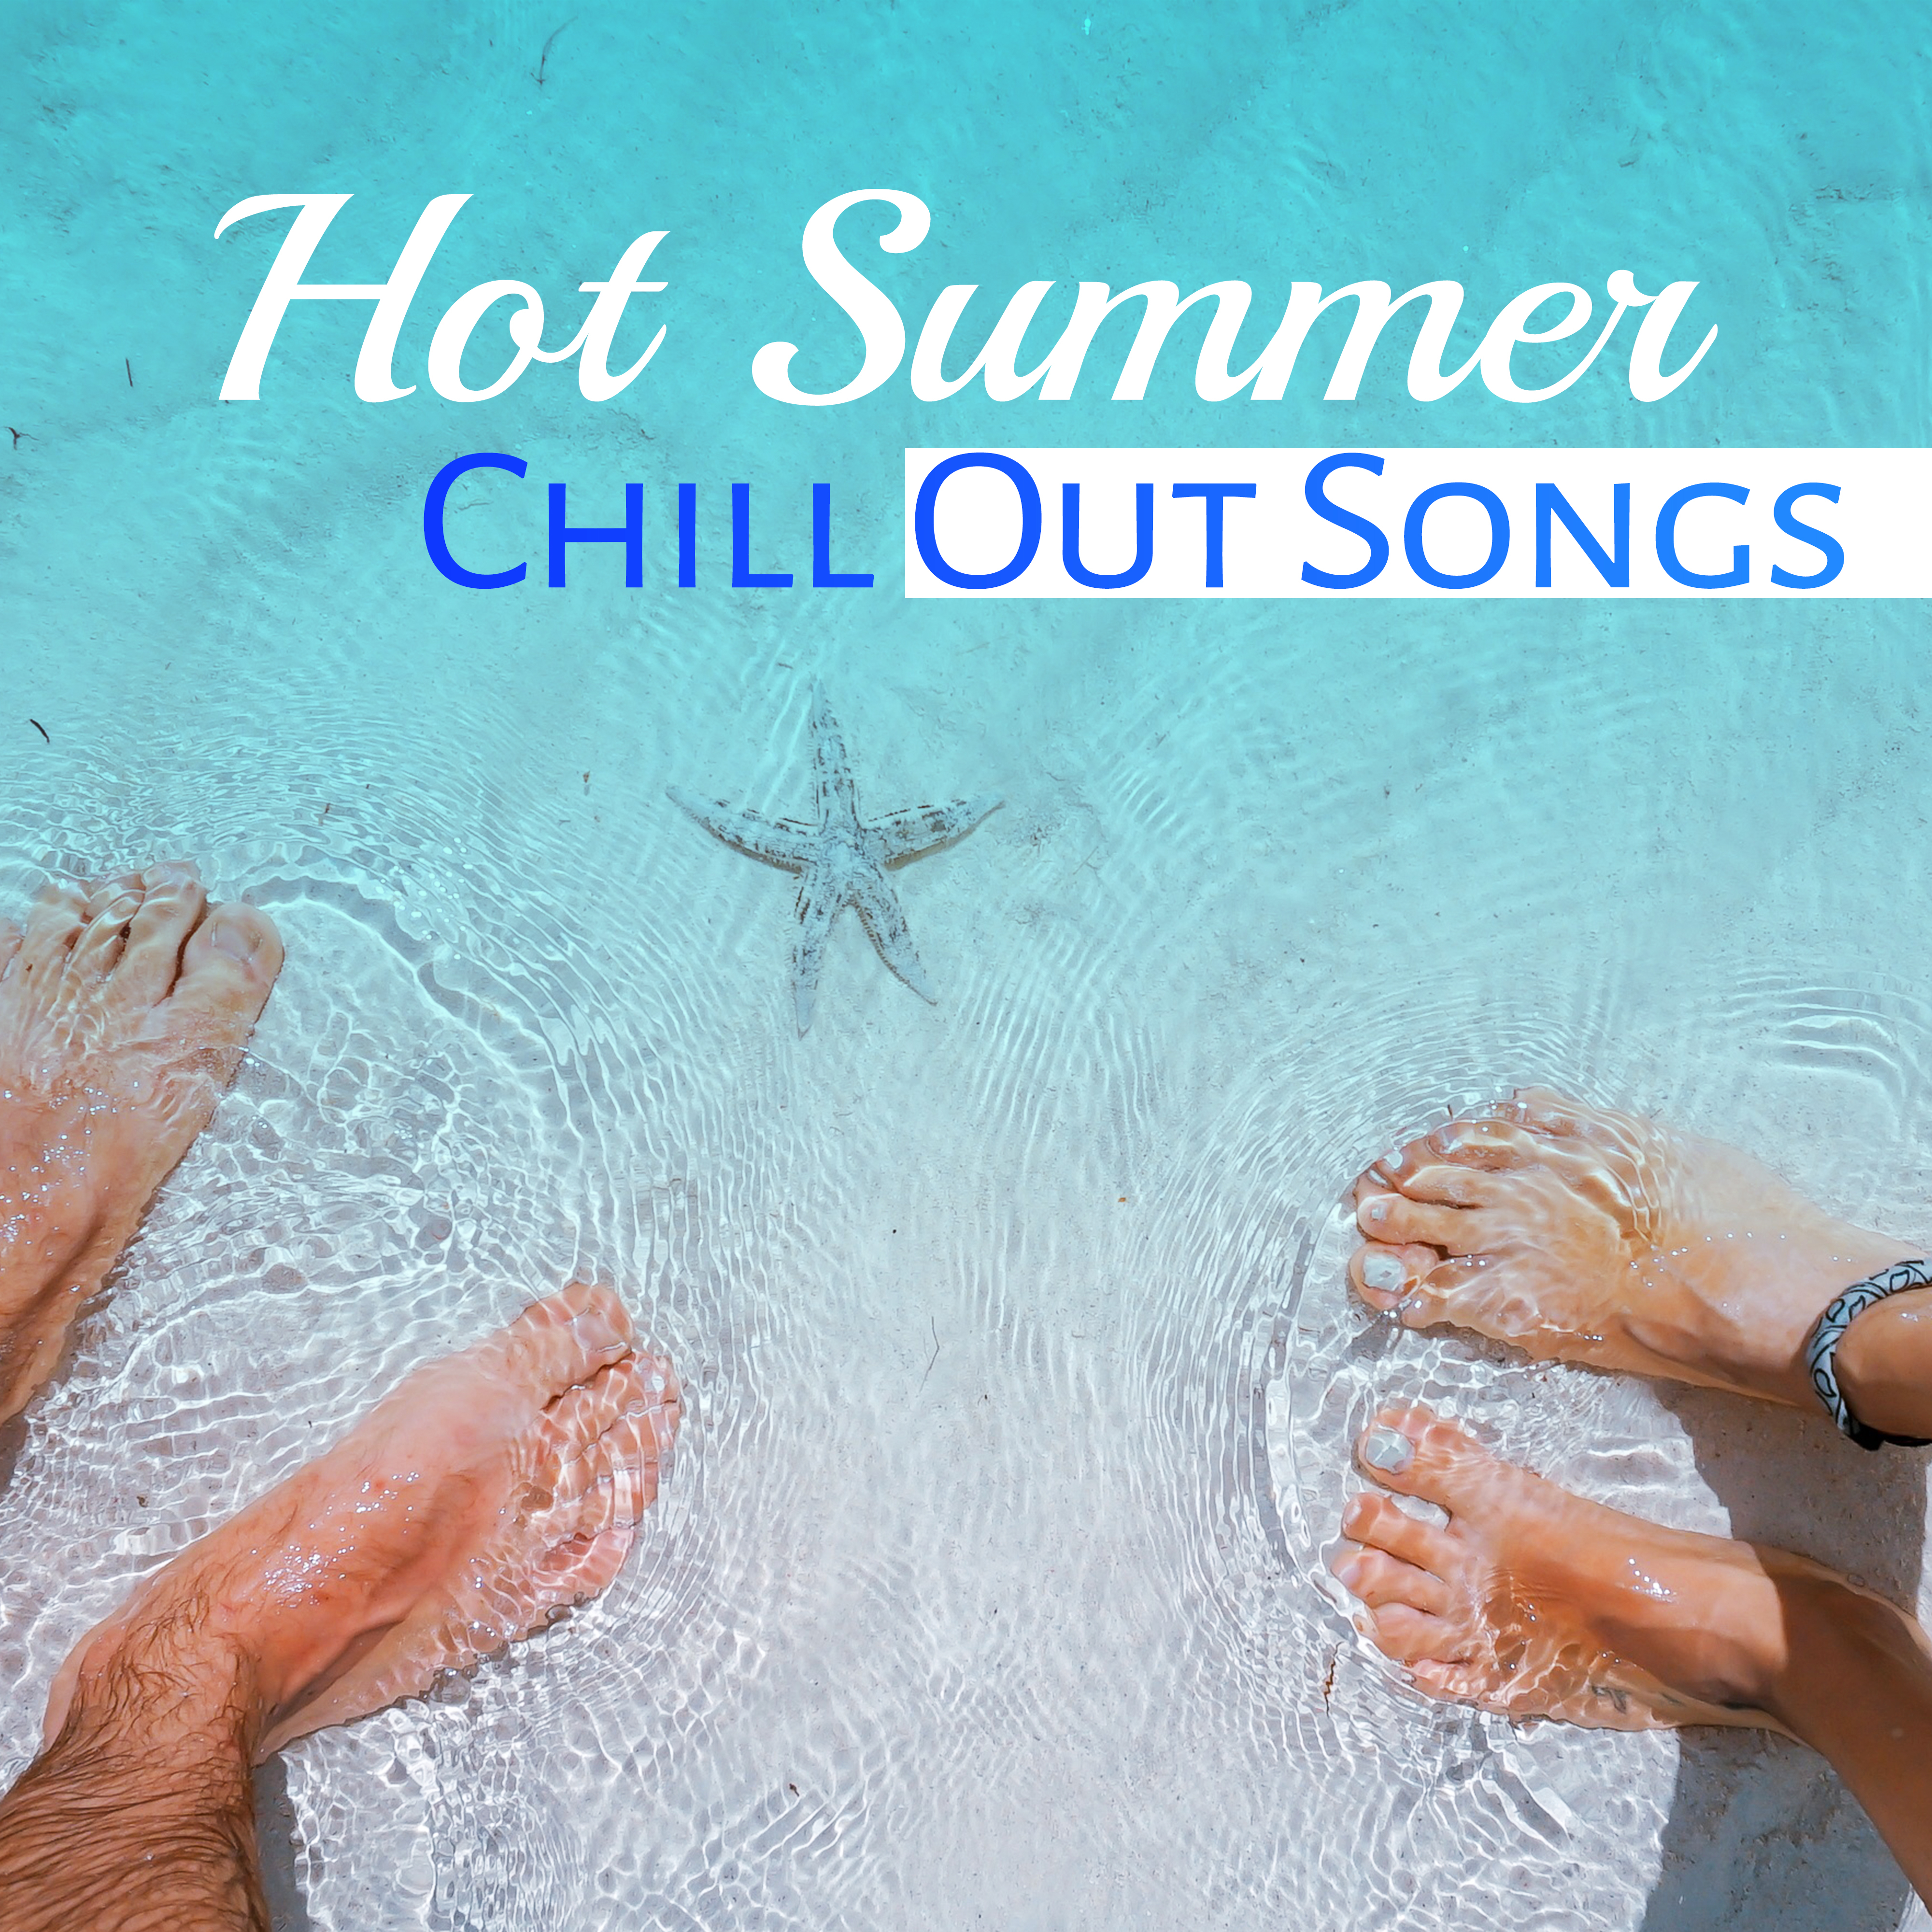 Hot Summer Chill Out Songs  Rest on the Beach, Chill Out Vibes, Electronic Beats, Sweet Holidays